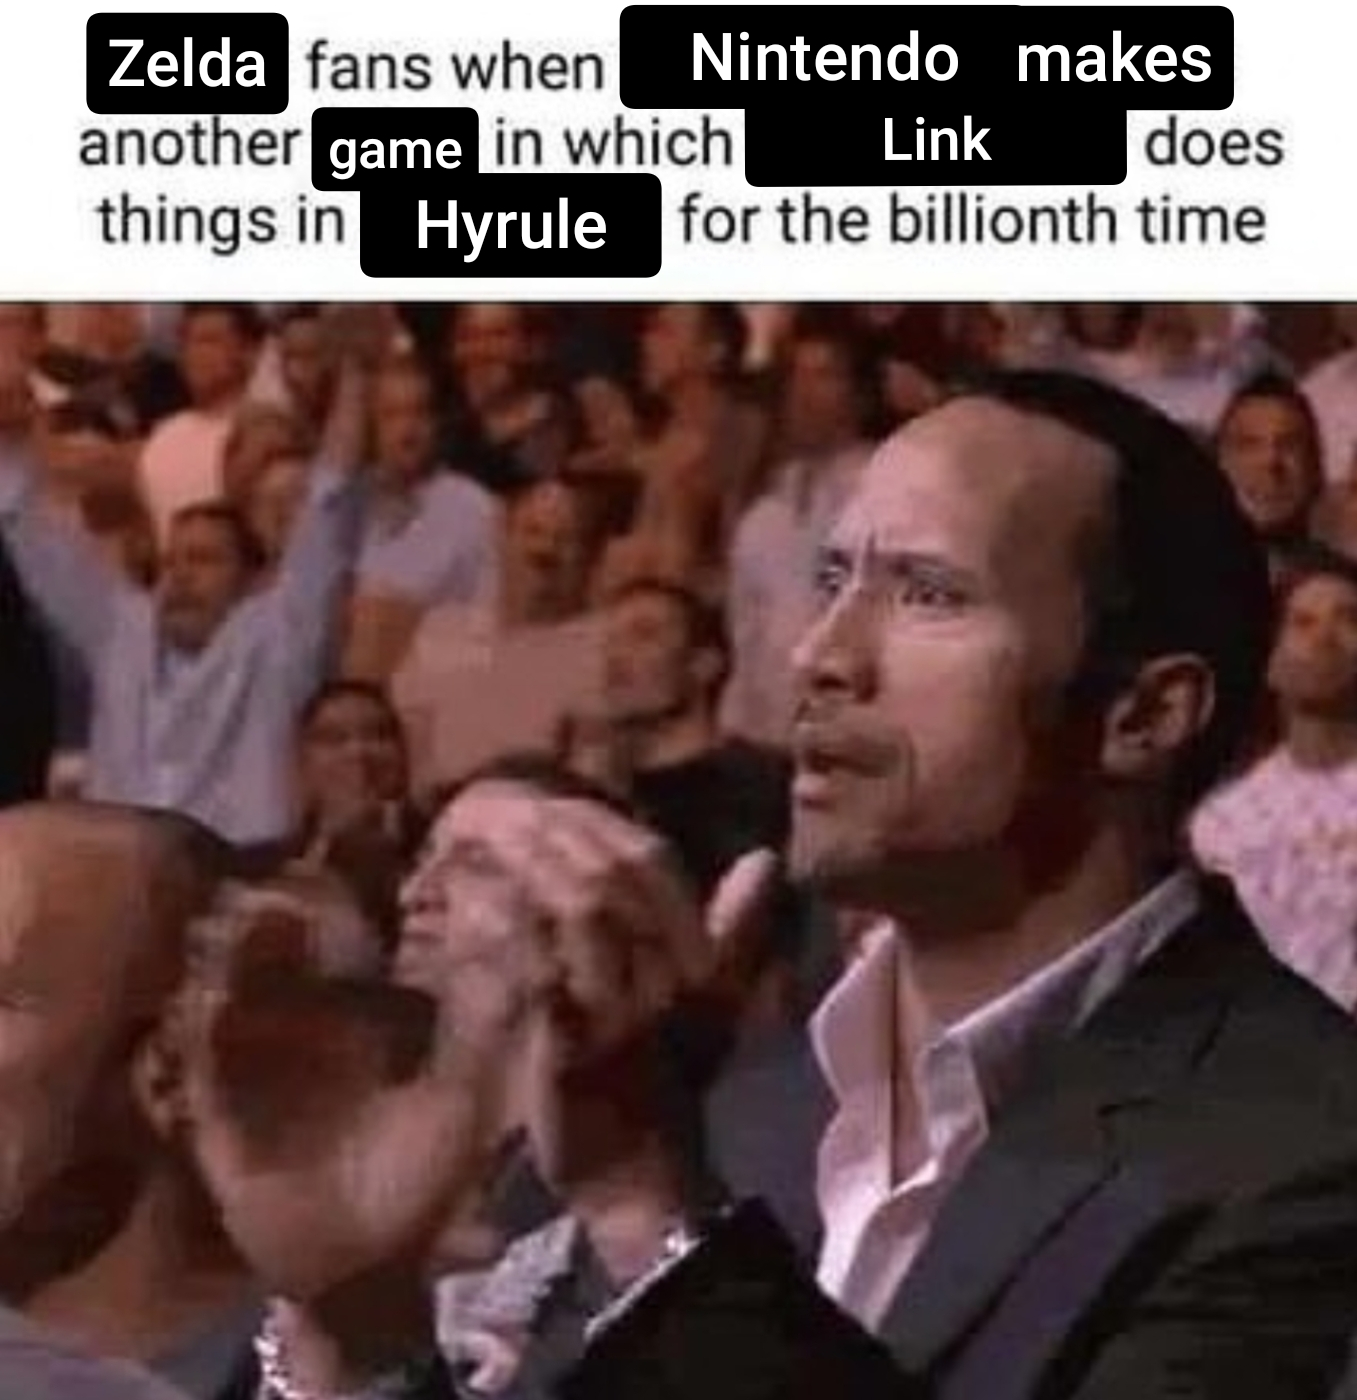 dank memes - photo caption - Zelda fans when Nintendo makes Link does another game in which things in Hyrule for the billionth time